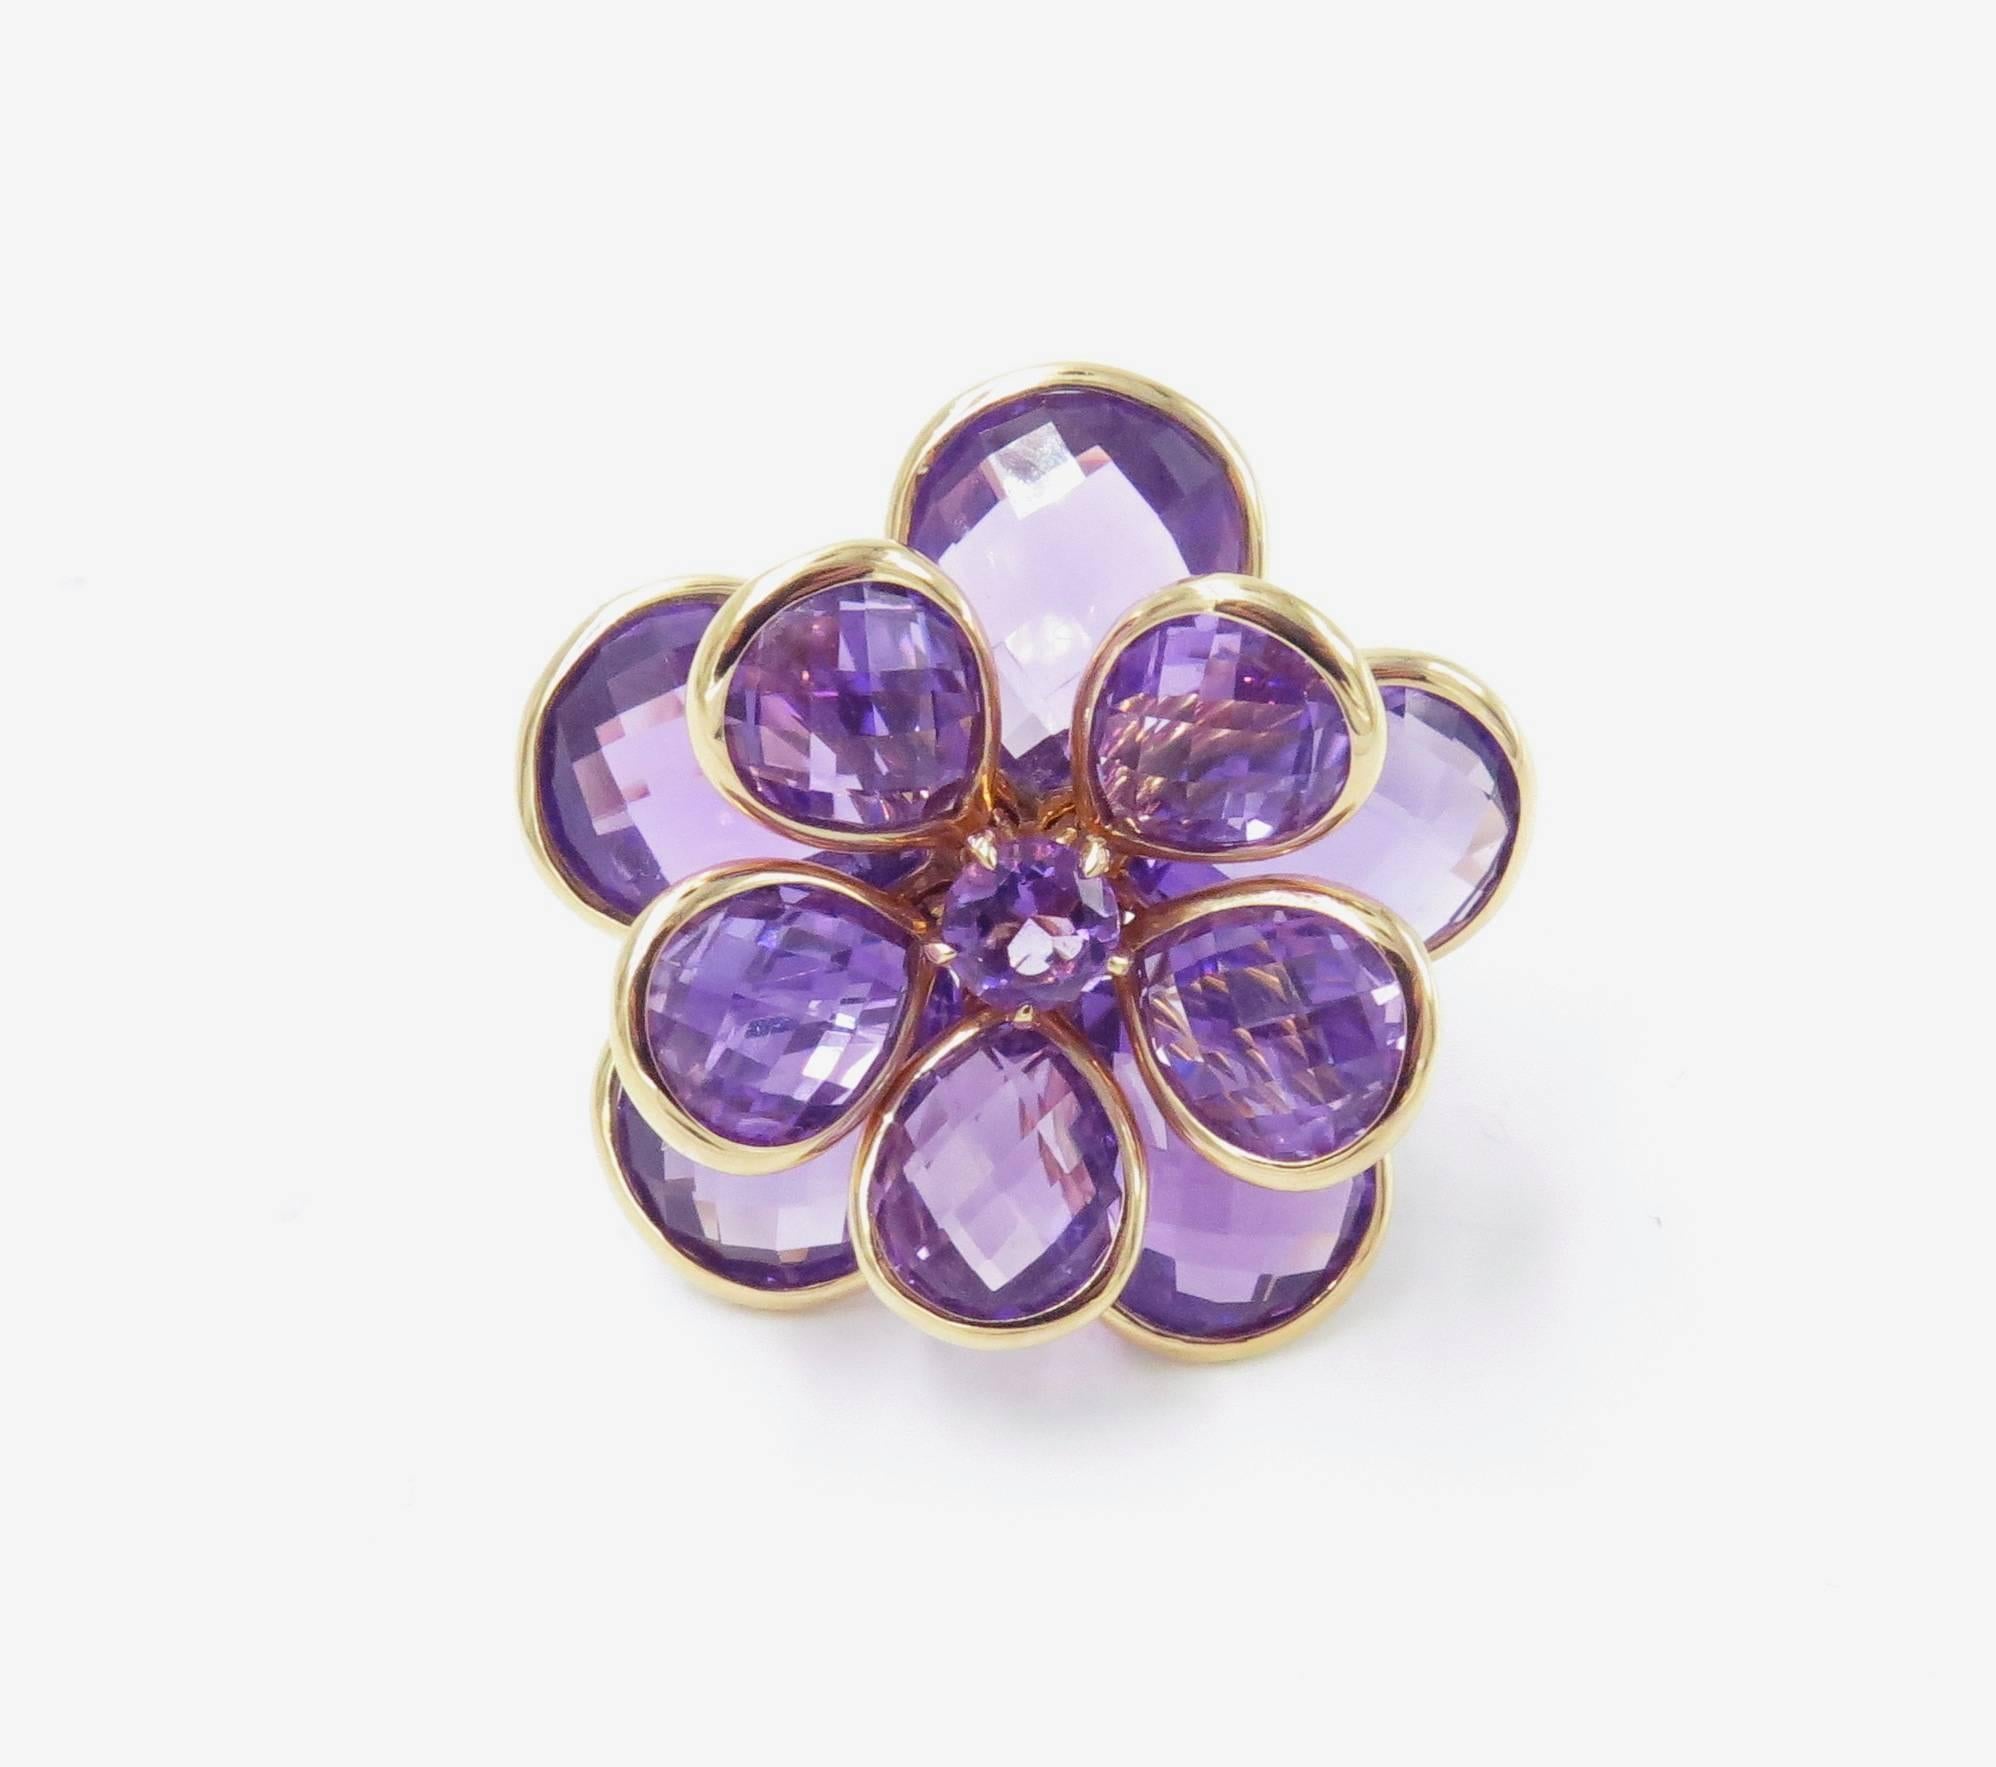 An 18 karat rose gold and amethyst ring, Suarez. Circa 2000. Designed as an articulated flowered, set with amethyst briolette petals, centering a circular-cut amethyst. Size 6 1/2. Gross weight is 21.3 grams. With maker's mark for Suarez. Stamped